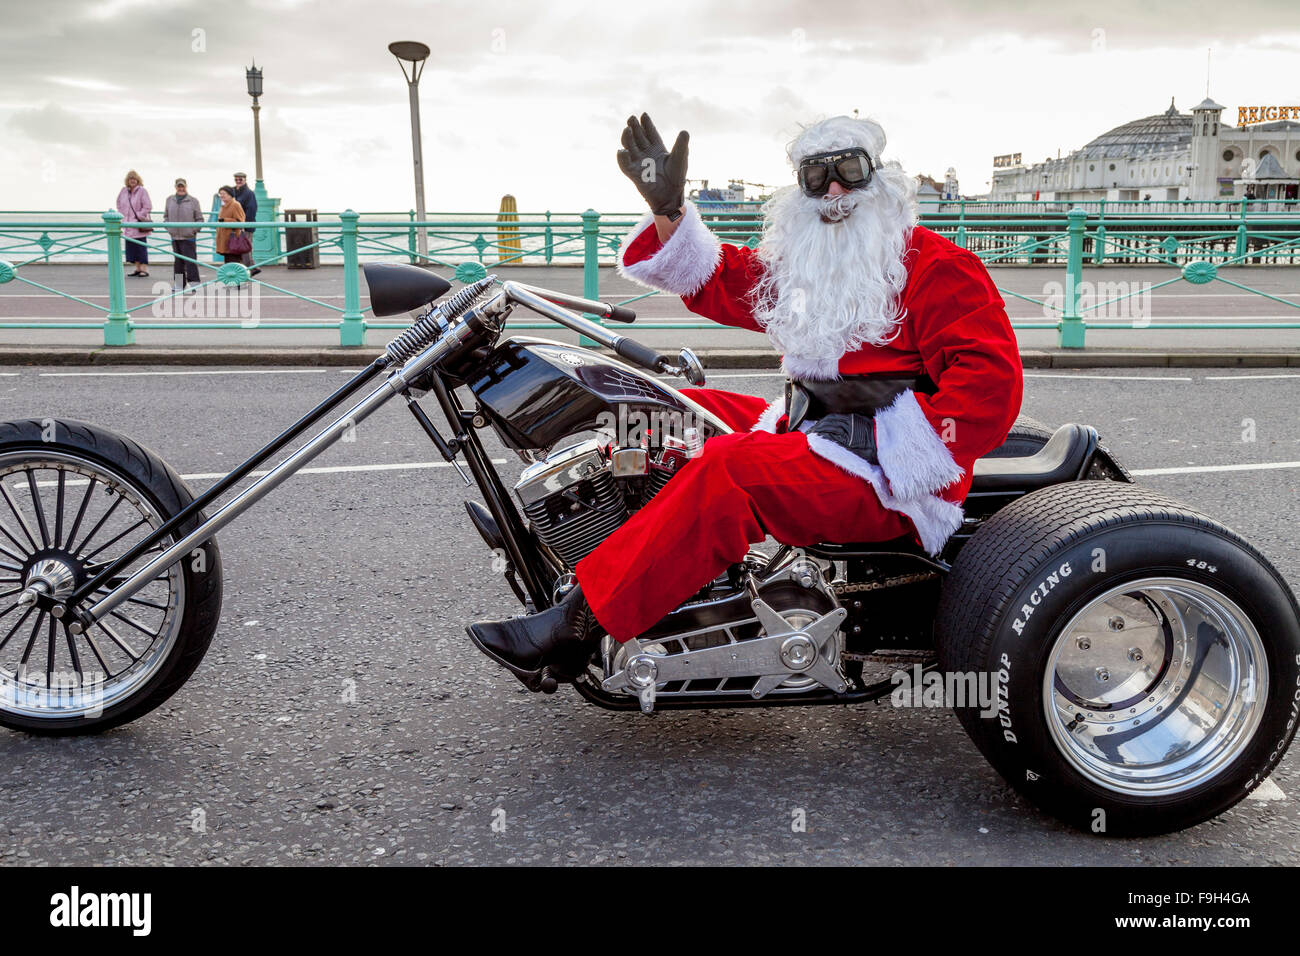 A Man Dressed As Santa Claus Sitting On A Motorcycle Waving, Brighton, Sussex, UK Stock Photo